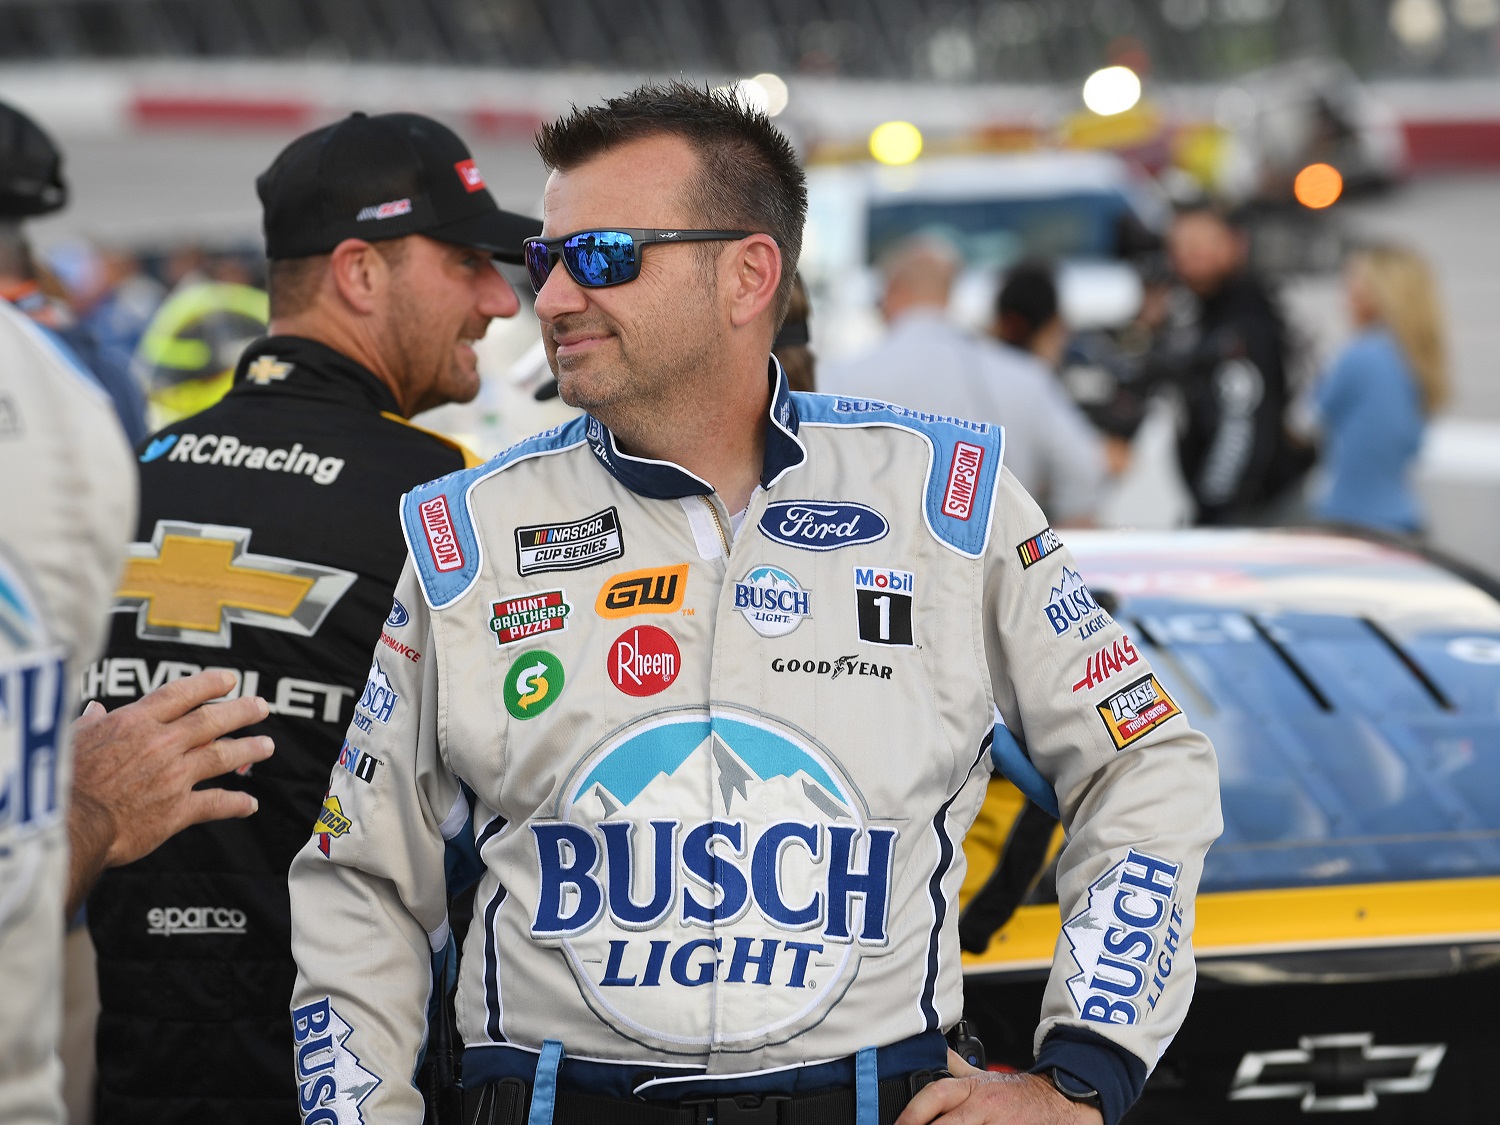 Rodney Childers, crew chief for Kevin Harvick, looks on during the running of NASCAR Cup Series Cook Out Southern 500 on Sept. 4, 2022, at Darlington Raceway. | Jeffrey Vest/Icon Sportswire via Getty Images